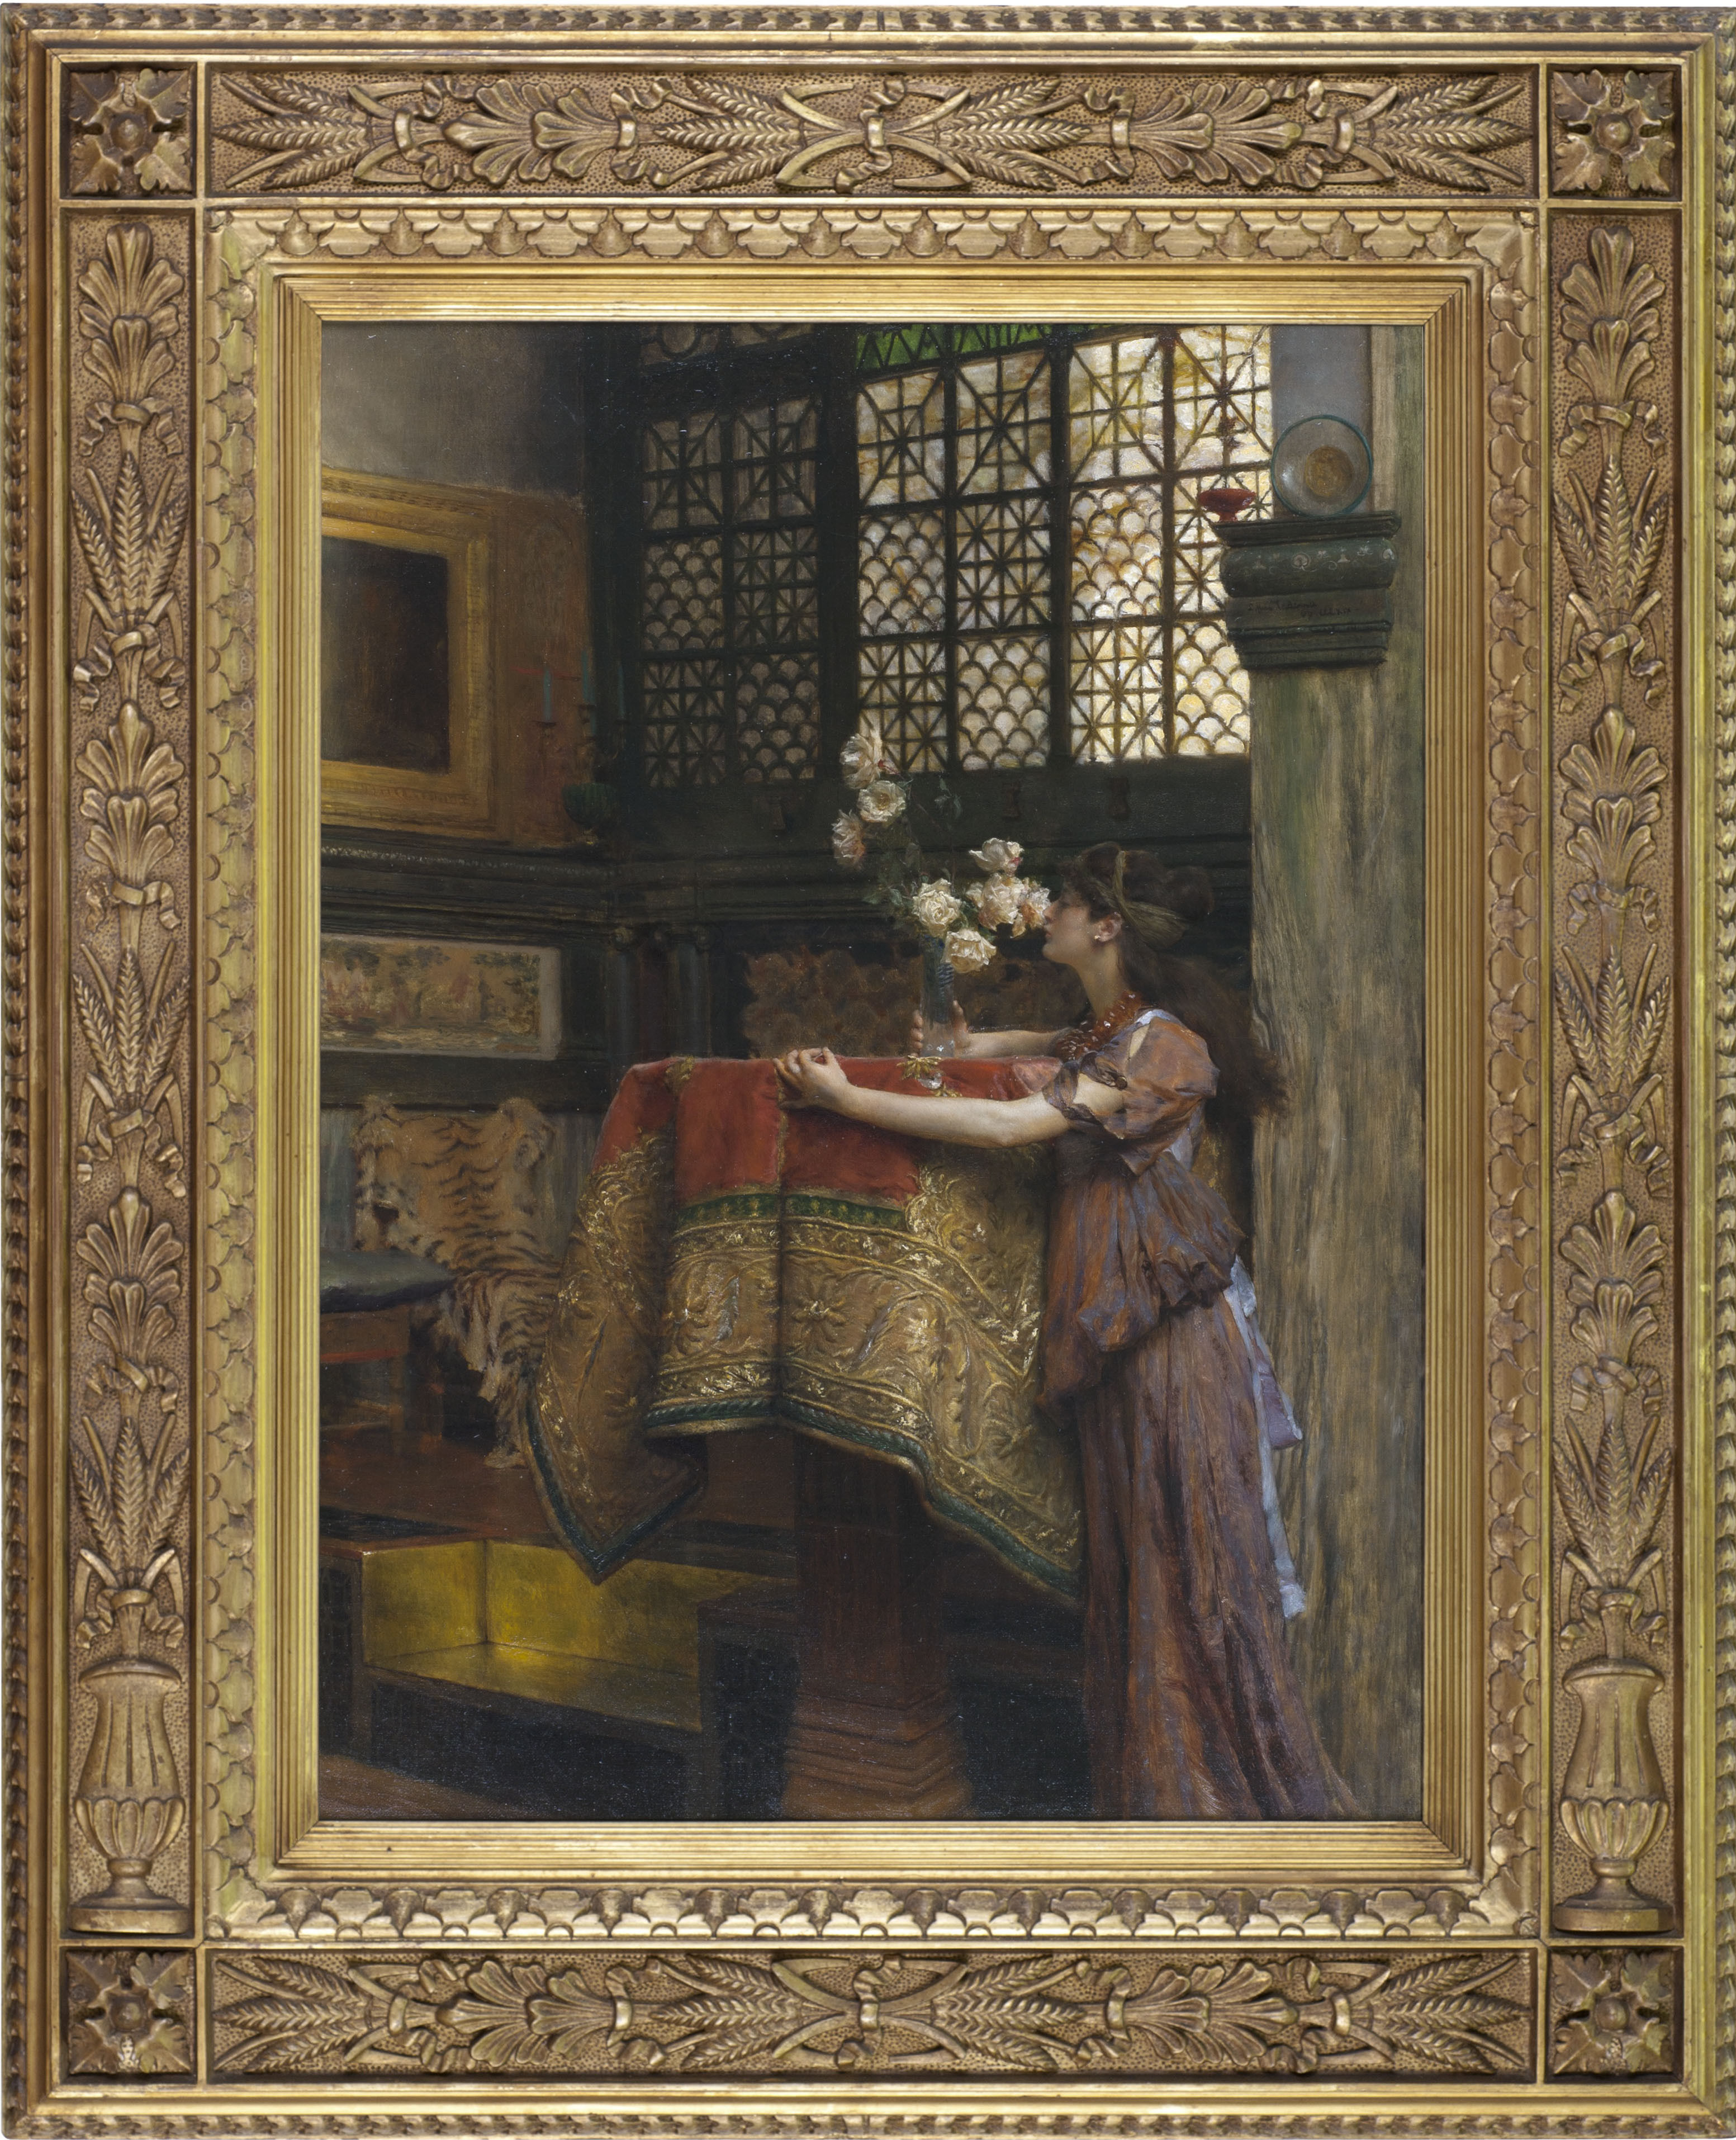 Painting Alma Tadema, 'In my Studio', with a beautiful frame, 1893